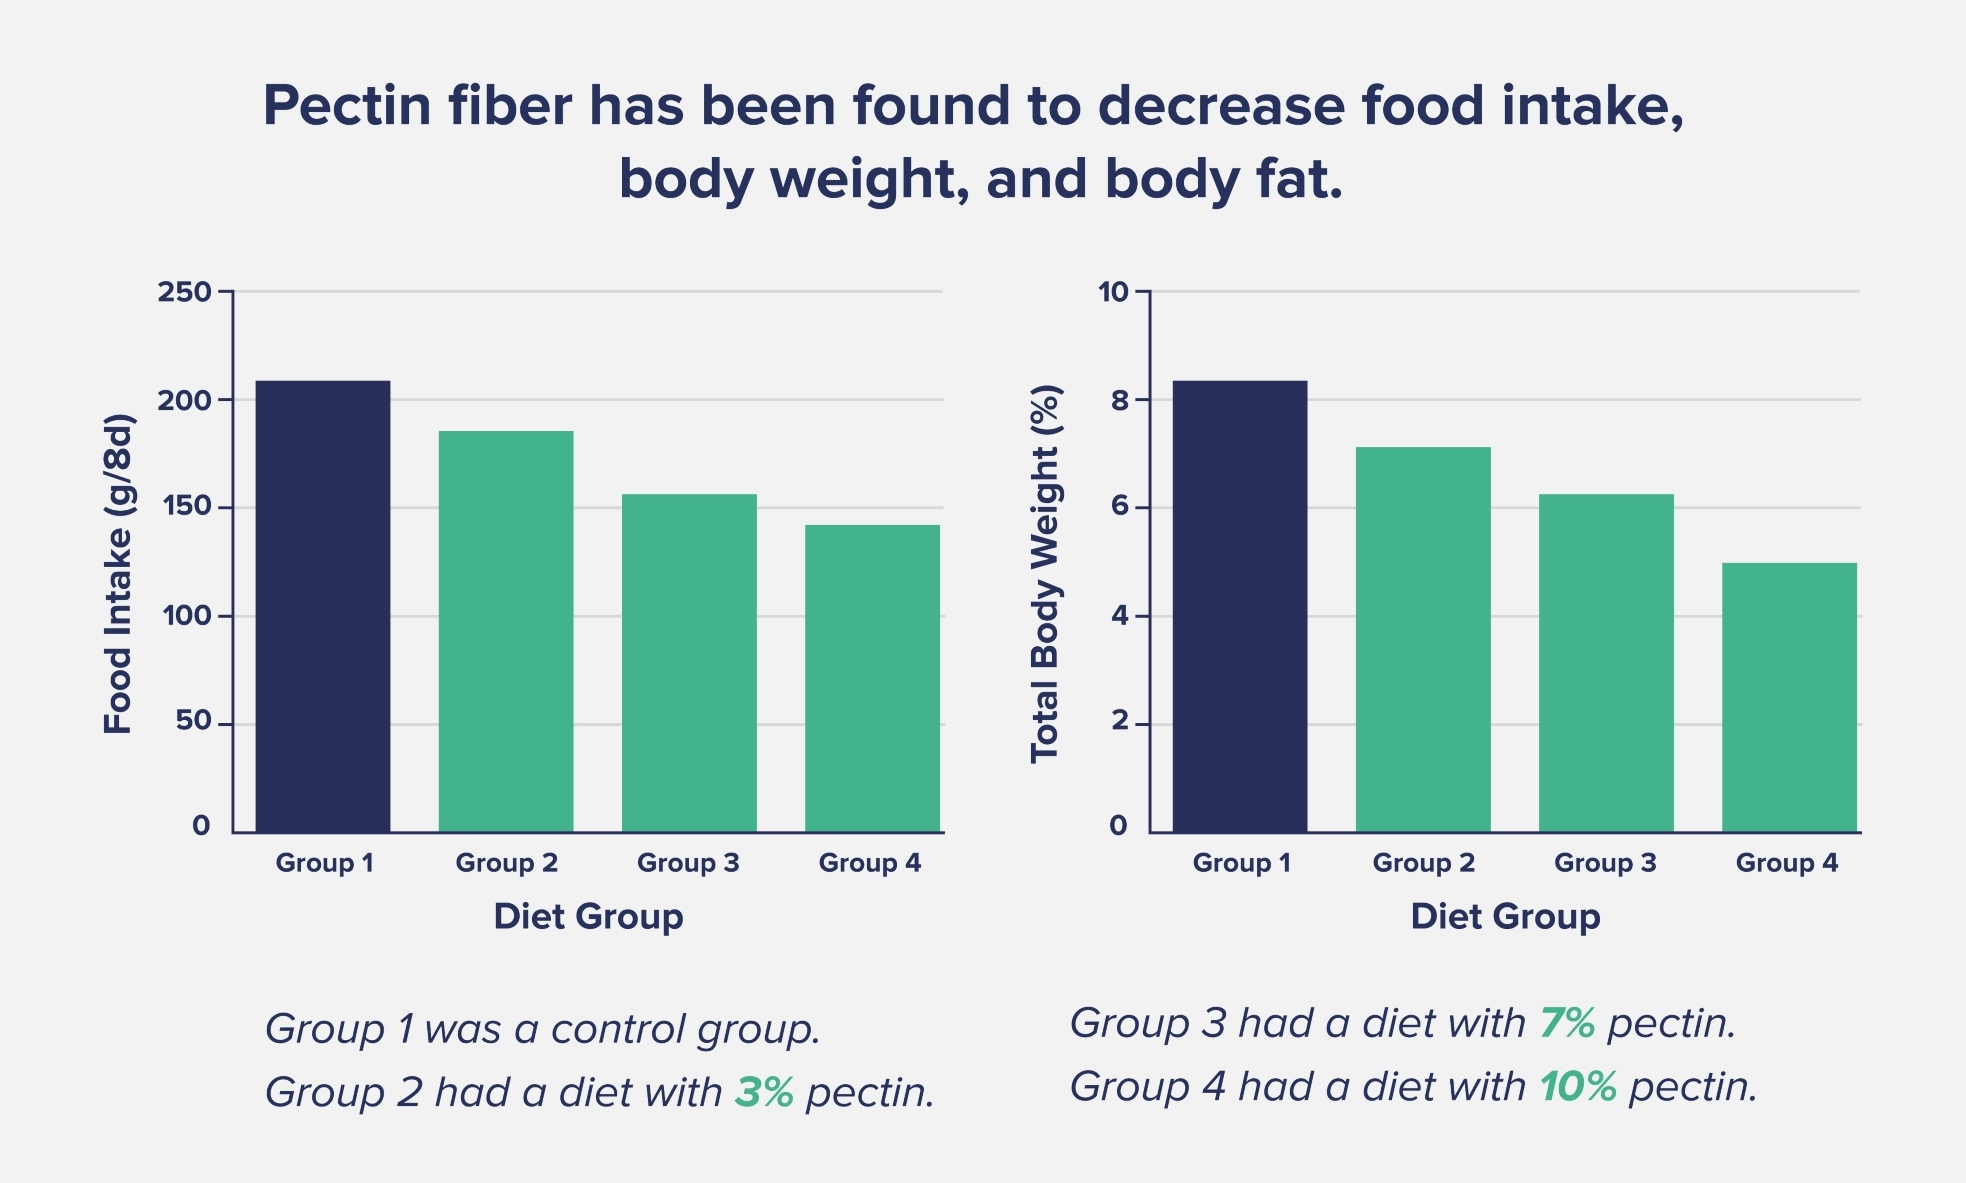 pectin fiber has been found to decrease food intake, body weight, and body fat